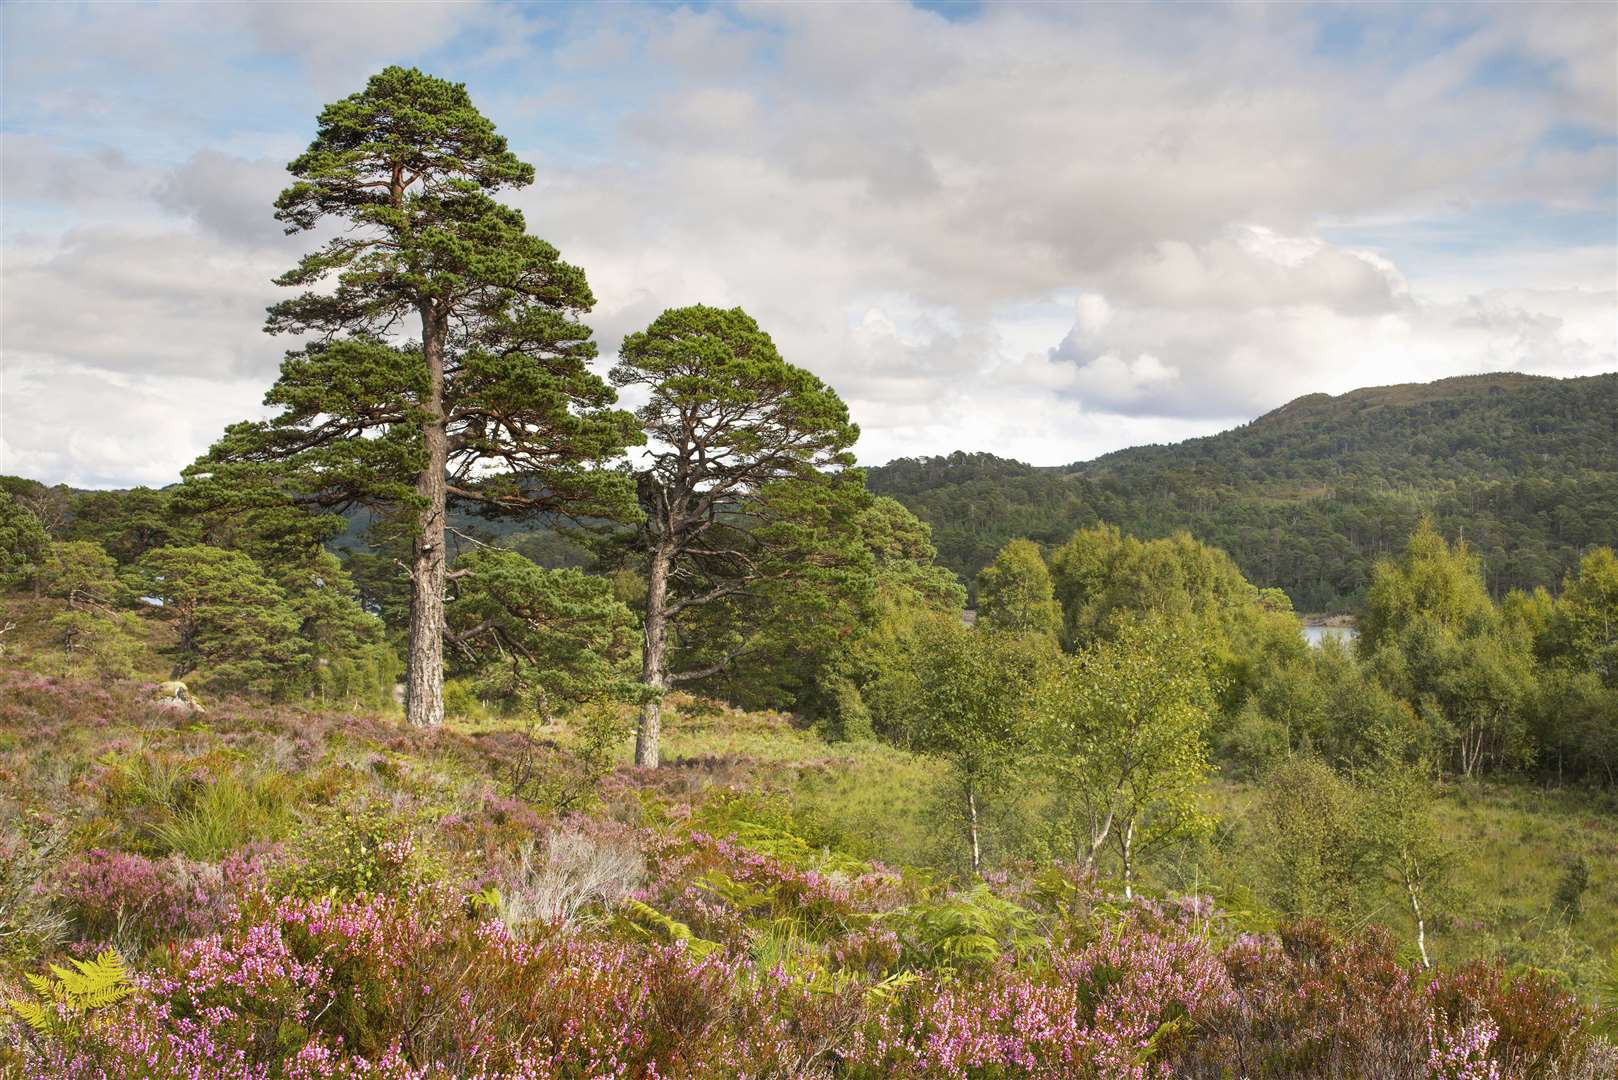 Scots Pines at Glen Affric. Picture by: Grant Willoughby